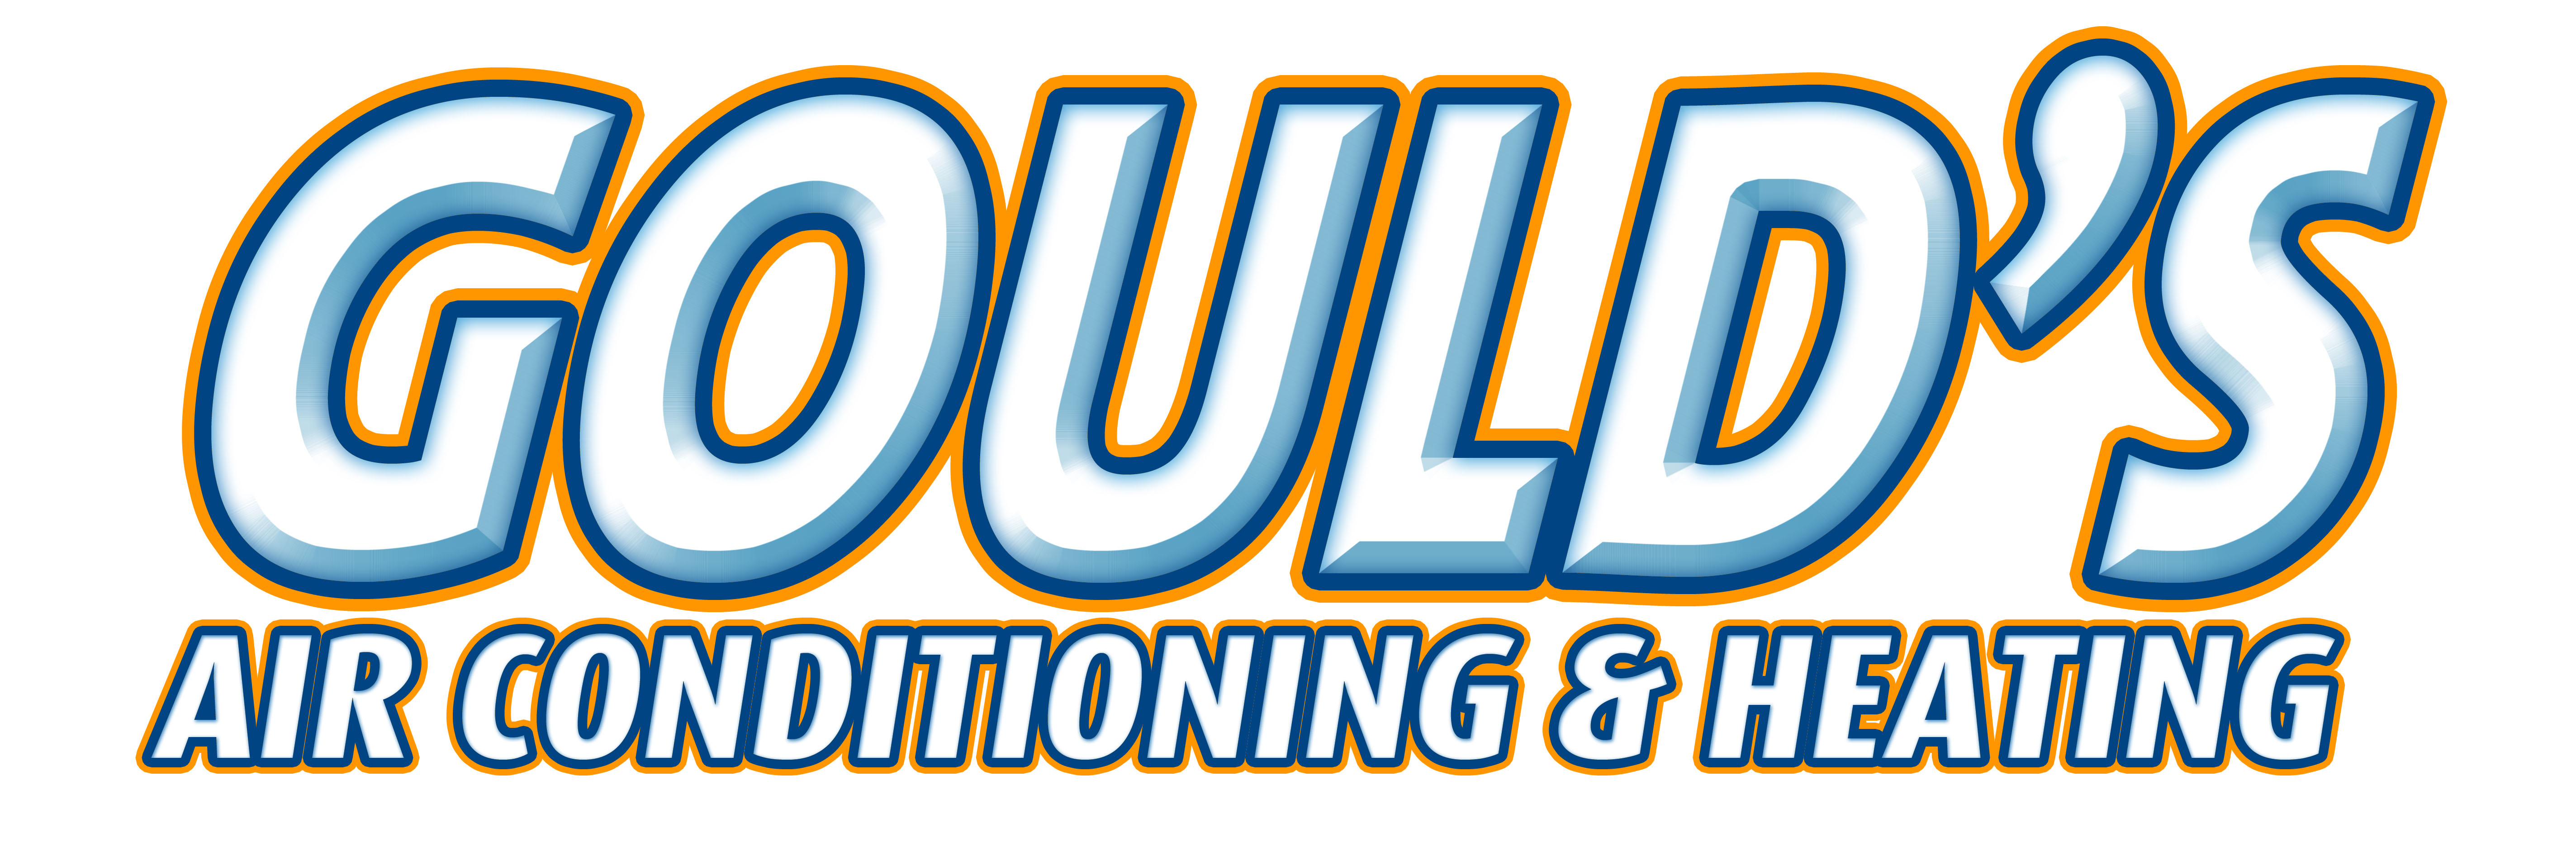 GOULD'S AIR CONDITIONING & HEATING Logo